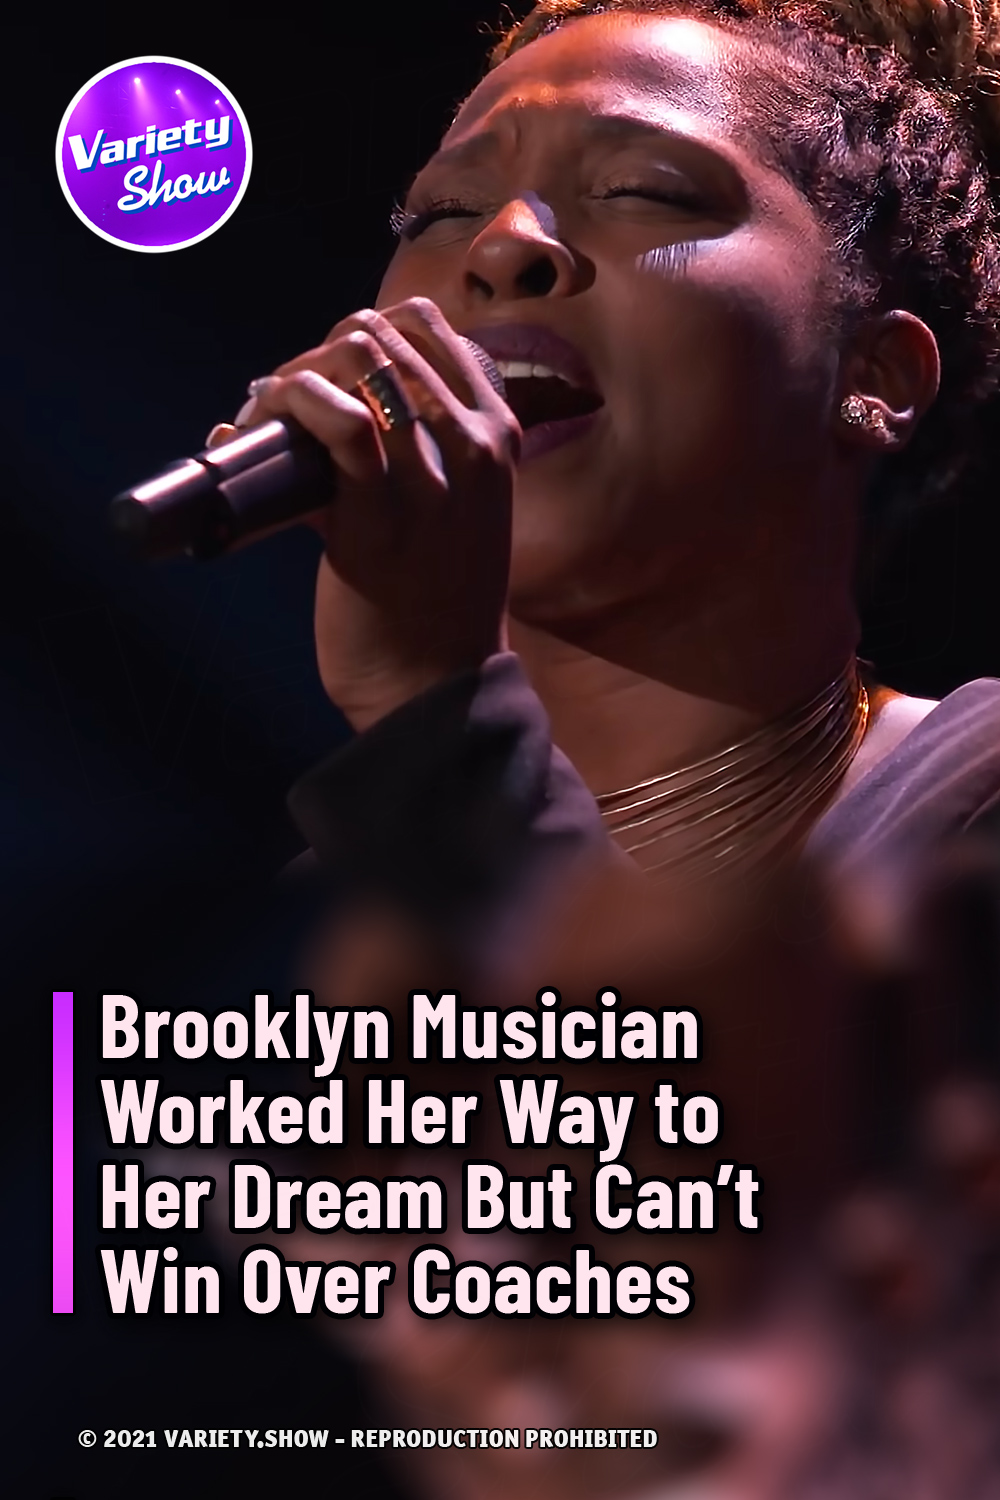 Brooklyn Musician Worked Her Way to Her Dream But Can’t Win Over Coaches